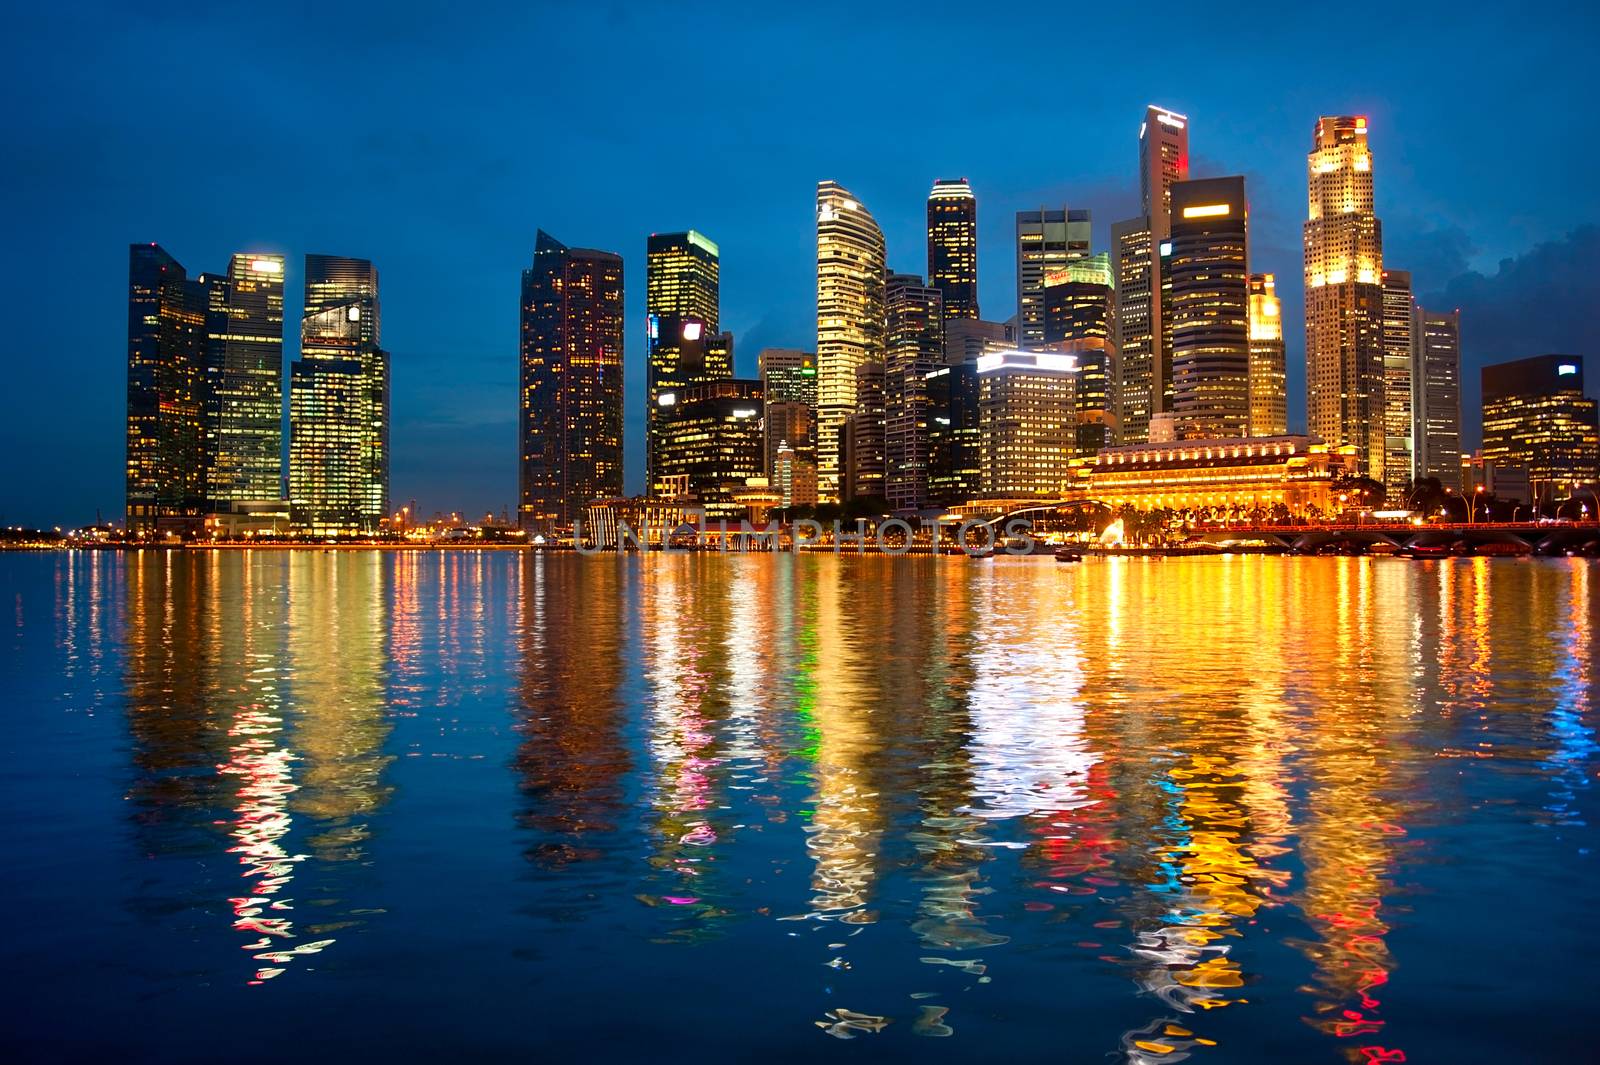 Panorama of Singapore downtown with reflection in a river